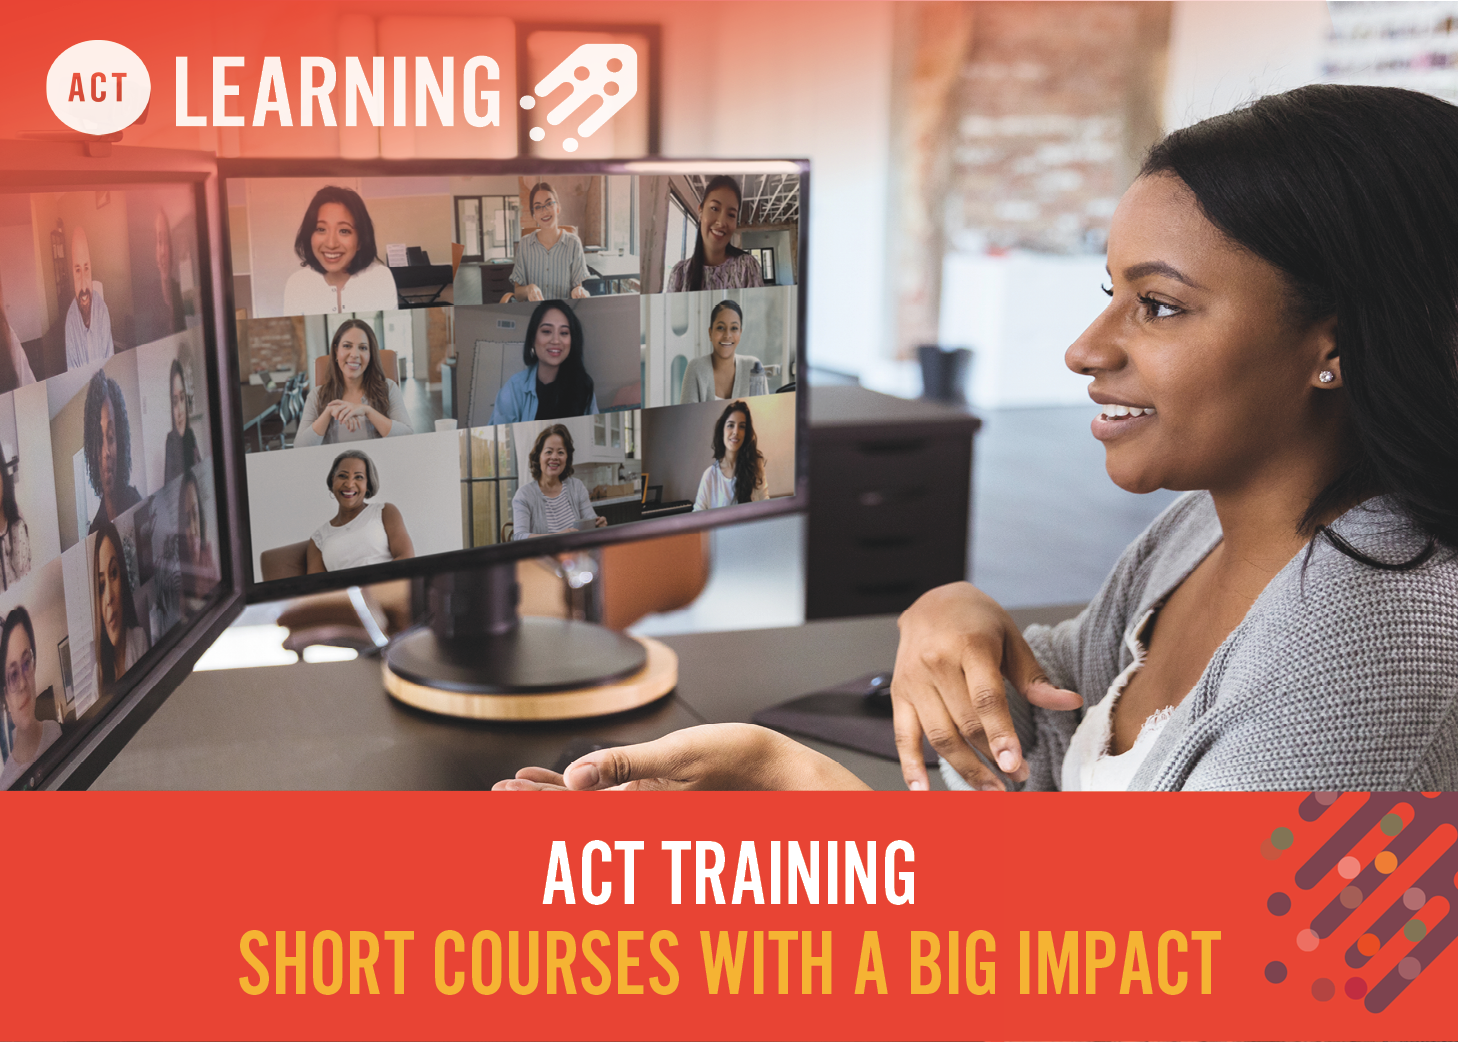 ACT TRAINING: SHORT COURSES WITH A BIG IMPACT. A woman interacting during an online training session